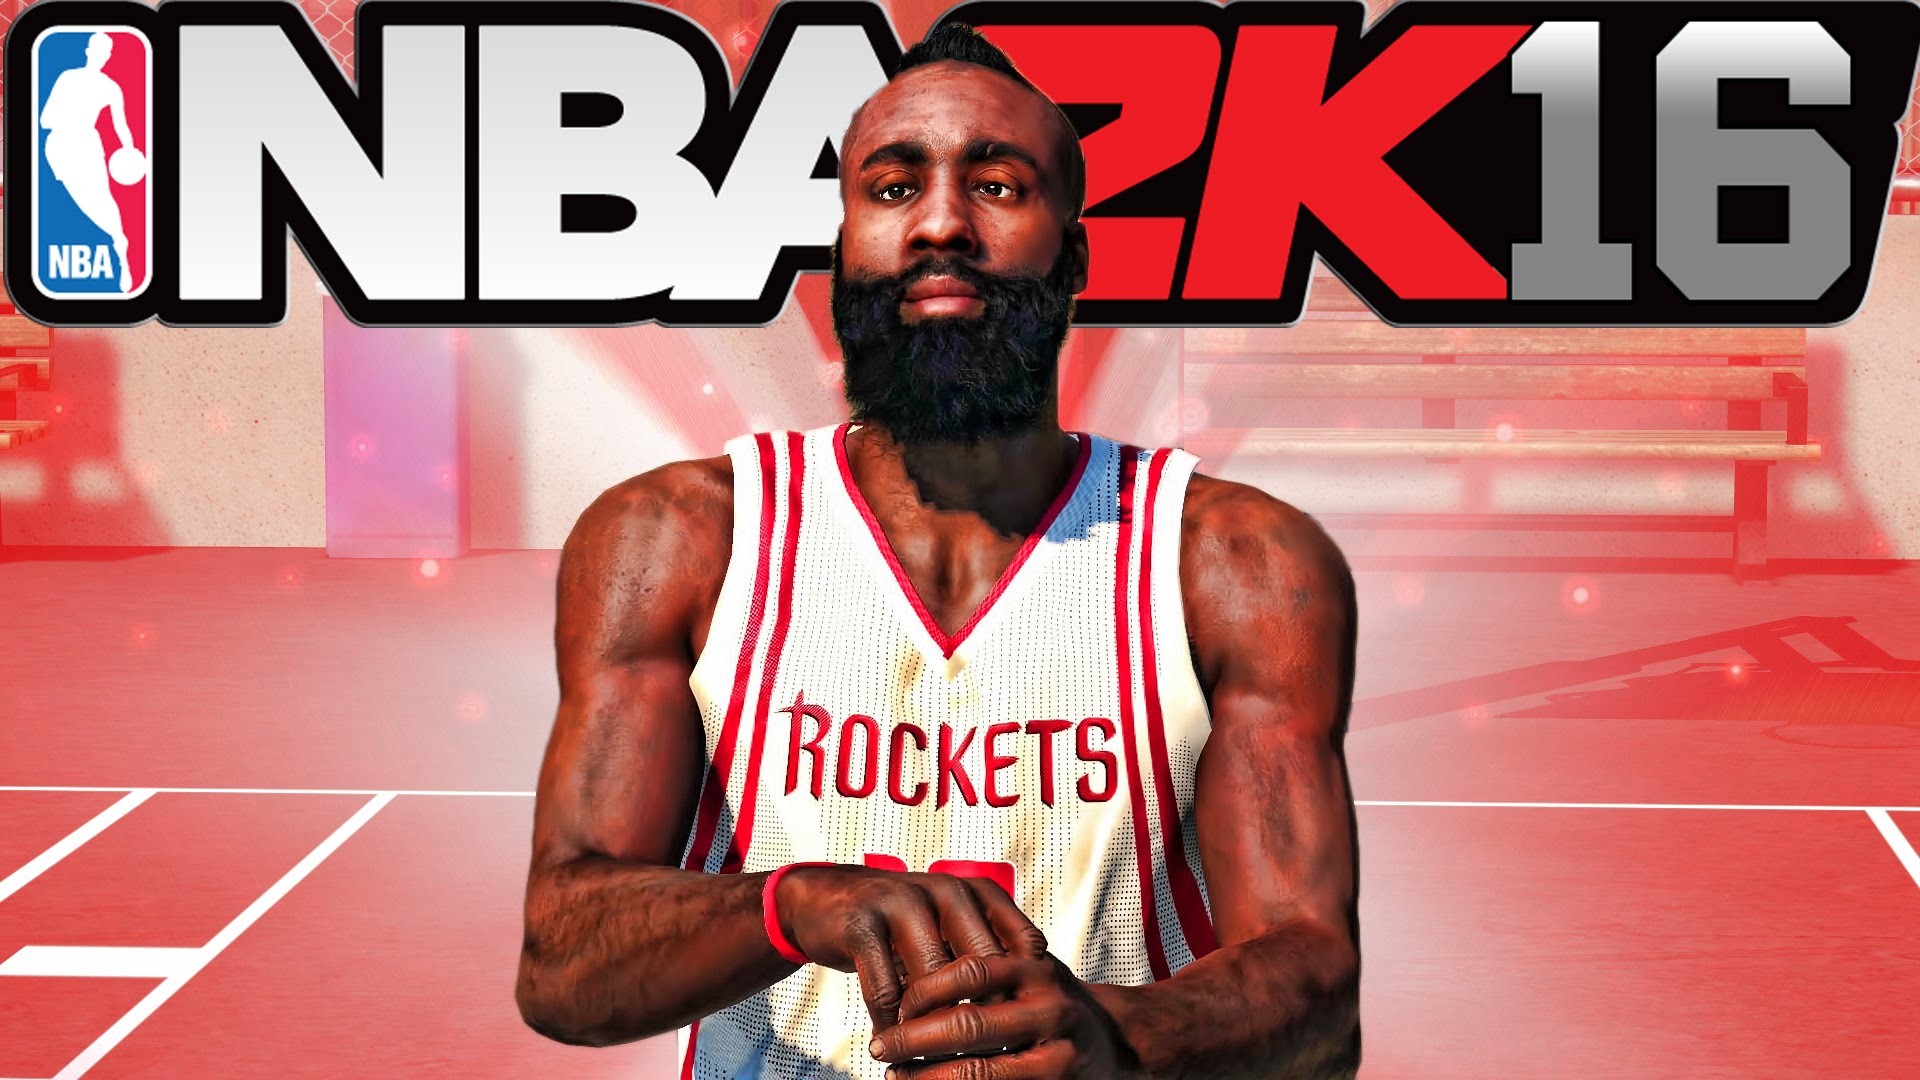 NBA 2K Wallpapers (81+ images)1920 x 1080